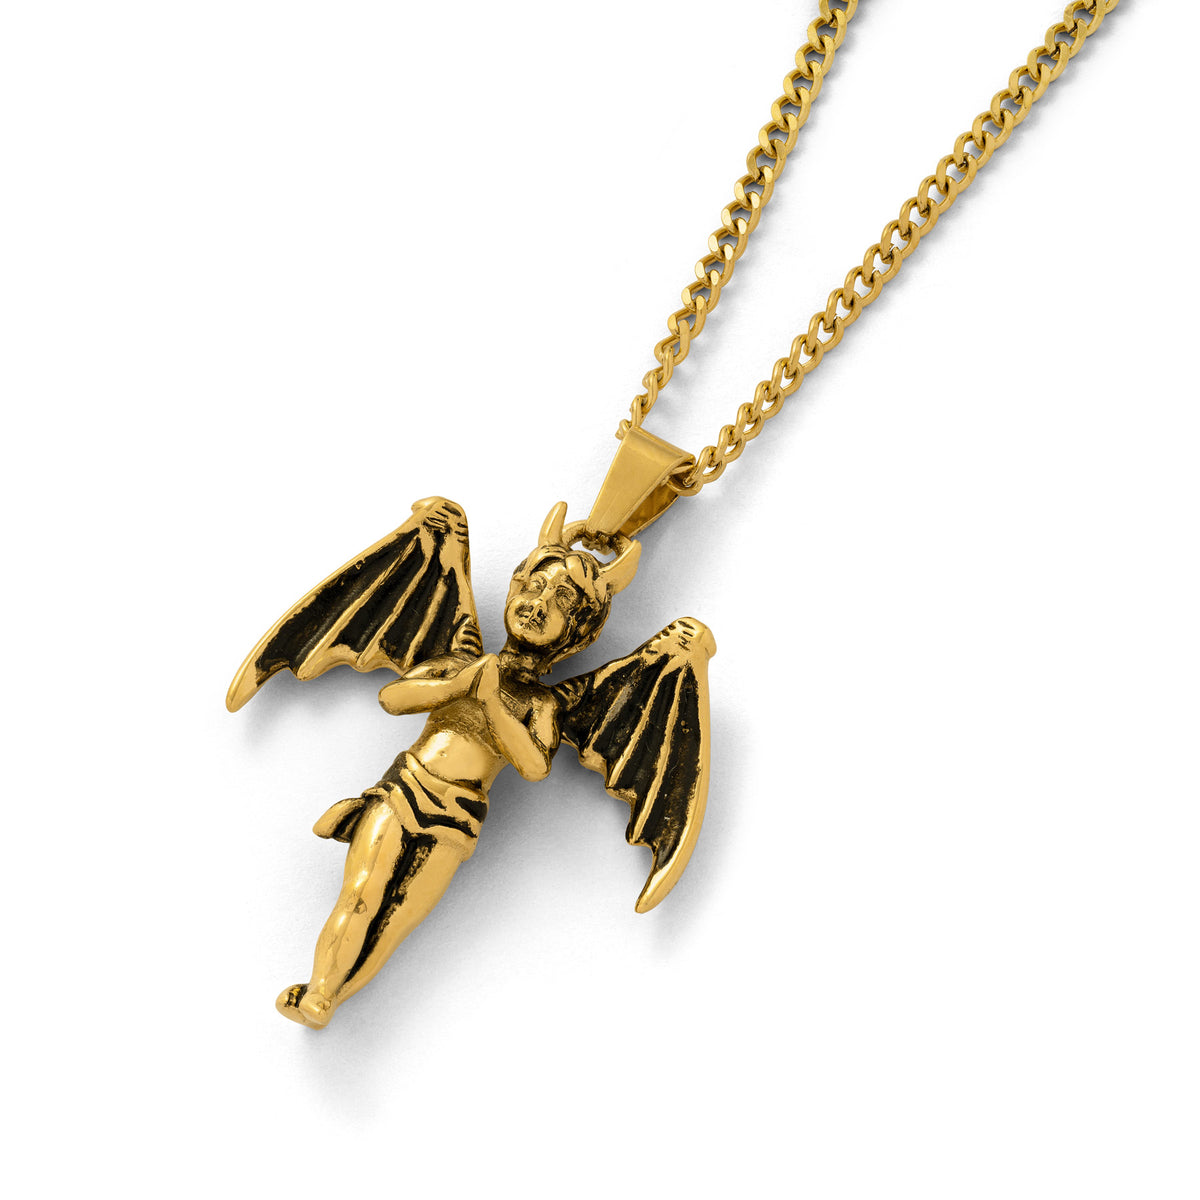 Gold jewellery charm demon on necklace